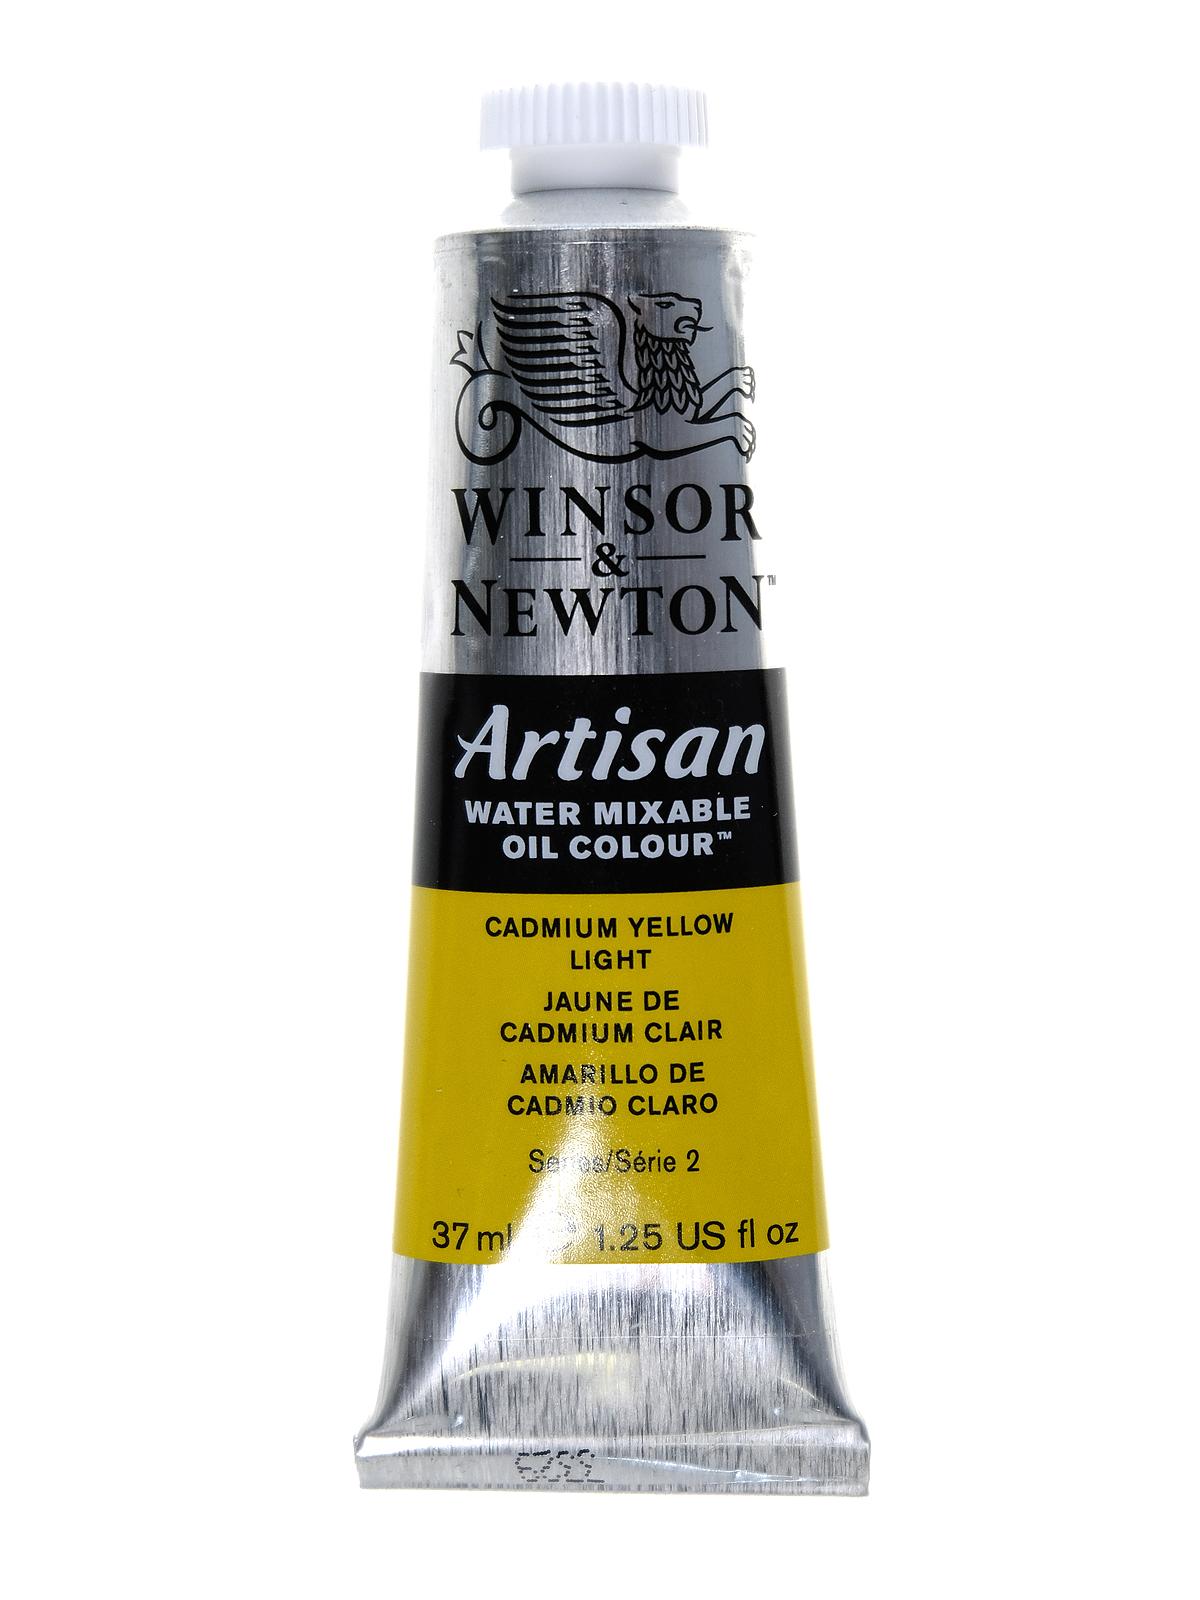 Artisan Water Mixable Oil Colours Cadmium Yellow Light 37 Ml 113